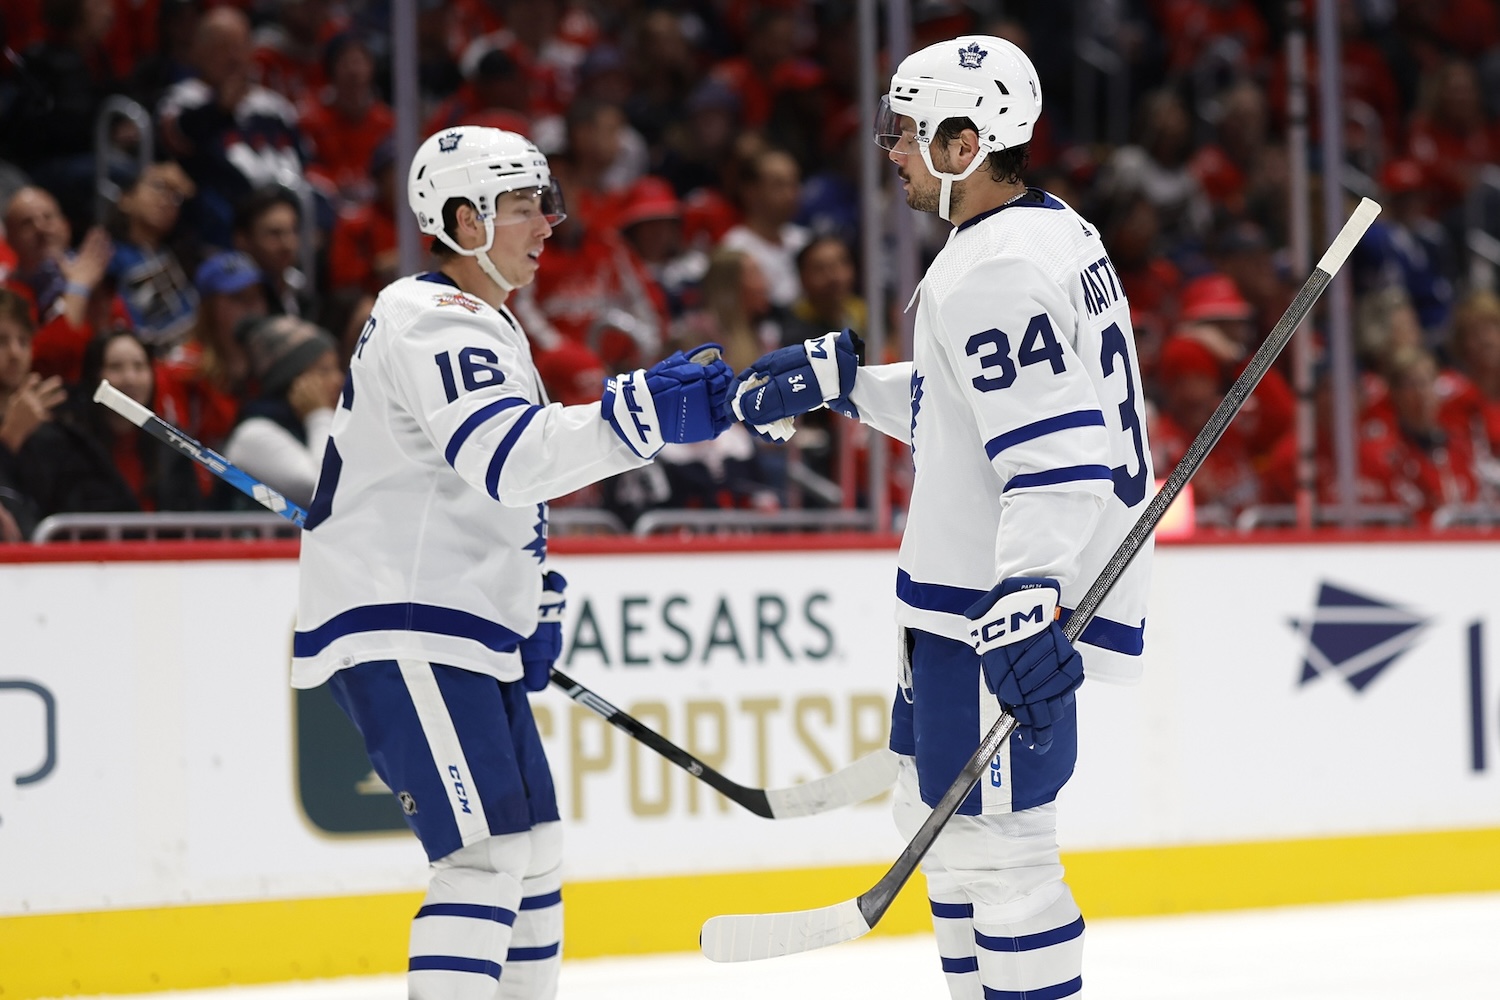 Oct 24, 2023; Washington, District of Columbia, USA; Toronto Maple Leafs center Auston Matthews (34) celebrates with Maple Leafs right wing Mitchell Marner (16) after scoring a goal against the Washington Capitals in the second period at Capital One Arena. Mandatory Credit: Geoff Burke-USA TODAY Sports